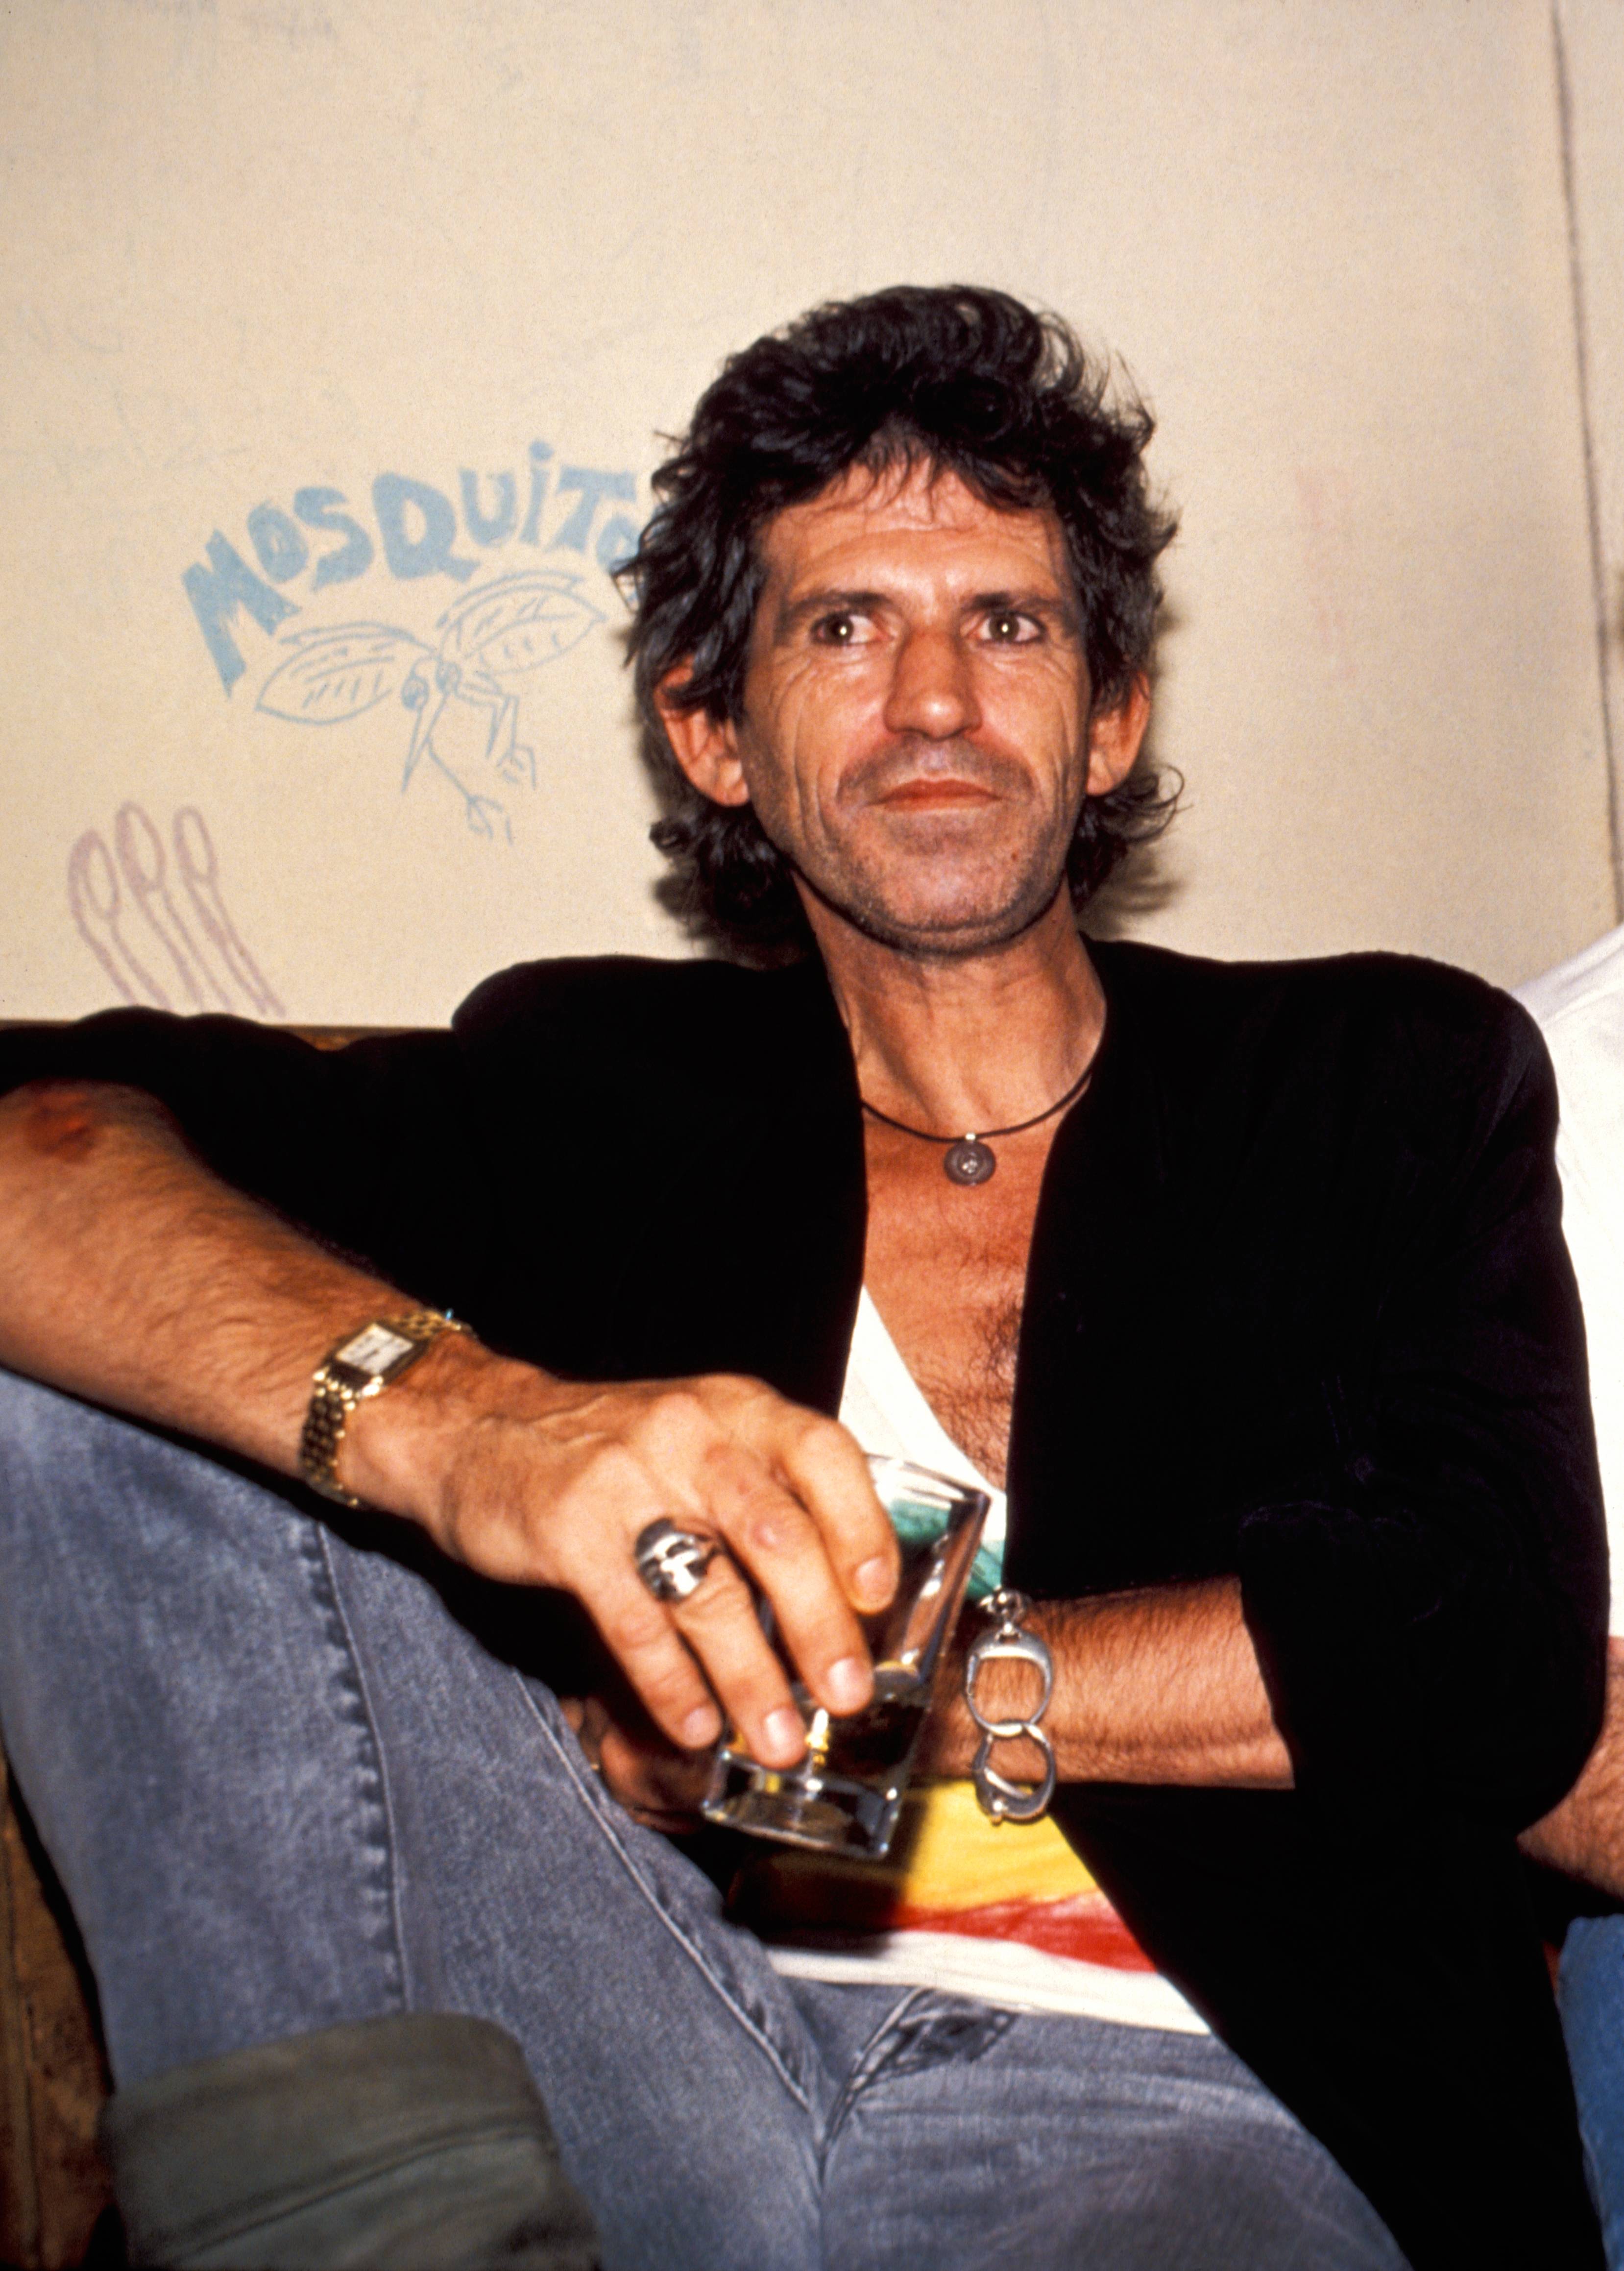 Keith Richards: Our 1985 Cover Story, <i>
<p><b>How is Anita [Pallenberg, mother of his first two children]?</b></p>
<p>Anita’s doing very well. Very well. Cleaned up her whole act. I’m very proud of her. Her and Patti actually talk to each other. I’m either very lucky or I’ve done something right. There is nothing hidden from anybody. They talk to each other, visit each other. And Anita still knits me sweaters.</p>
<p>Maybe it’s because we never had the divorce thing. By not getting married and divorced, where the lawyers force you to hate each other, just from the point of “As your lawyers, Mrs. So-and-so, I advise you to get this much out of that sonofabitch.” And I suggest we change the venue of this divorce, Mr. So-and-so, because they can’t screw so much out of you here.” So you become implacable enemies. Anyone that survives a divorce and still talks to each other is a miracle. People can actually get along a lot better without resorting to the law.</p>
<p><b>Then why did you make it legal with Patti?</b></p>
<p>Because it’s me now, and it’s Patti, and it’s a different point of view. Anita and I, in the ’60s, were never interested in marriage. It seemed an archaic and dumb thing to do just to have a child. And that was then and that was Anita, and that was me and Anita. Patti and I have a different relationship.</p>
<p>And besides, shit, I’m gonna try anything. And if I’m gonna try anything like marriage, I’m only gonna try it once. And if I’m gonna try it once, it’s gonna be with this chick. ‘Cuz I’m not about to try it twice. I ain’t a Texan, I ain’t Bobby Keys—if he loves her, he’s gotta marry her. It’s just a different point of view. For me, it’s worked out fine, ‘cuz I can still talk to my ex-whatever. And there are other exes before Anita, and I can still talk to <i>them</i>.</p>
<p><b>How did you meet Patti?</b></p>
<p>It was engineered by other people, matchmakers. It was my birthday [1979]. We were all in New York. A few people had the same idea at the same time for a year before I ever met Patti. Every other night, somebody would say, “Oh, you should meet this Patti Hansen.” I kept asking, “Why should I meet this Patti Hansen.” I found out later. But it was one of those inevitable things. She was getting the same stuff. Until eventually somebody said, “They’re never gonna get it together themselves. We have to throw them together.”</p>
<p><b>What did her family think of you at first?</b></p>
<p>The first time I went to meet her parents, I was out of it. Out of my brain. I’d been up for days, got drunk, figured I’d keep myself real mellow. Instead, I wound up smashing up stuff. But they dug it. I went crazy and it didn’t offend them. I could’ve blown it, you know, “Never come back here again!” I was my worst.</p>
<p>After all this time, I’d never been through this trip, meeting a girl’s parents, so it was important to me. Try to be real cool, and I overdid it. I went totally over the top. But they dug me for it. That was the first indication that this was family I could do with if they could take that.</p>
<p><b>The old “Would you let your daughter marry a Rolling Stone?”</b></p>
<p>I’m still not finished with that, after all these years. Once those things are pinned on you, they stick with you forever. It might seem slightly silly when you’re 60 or 70 years old.</p>
</p></p></p><p>To see our running list of the top 100 greatest rock stars of all time, <a href=